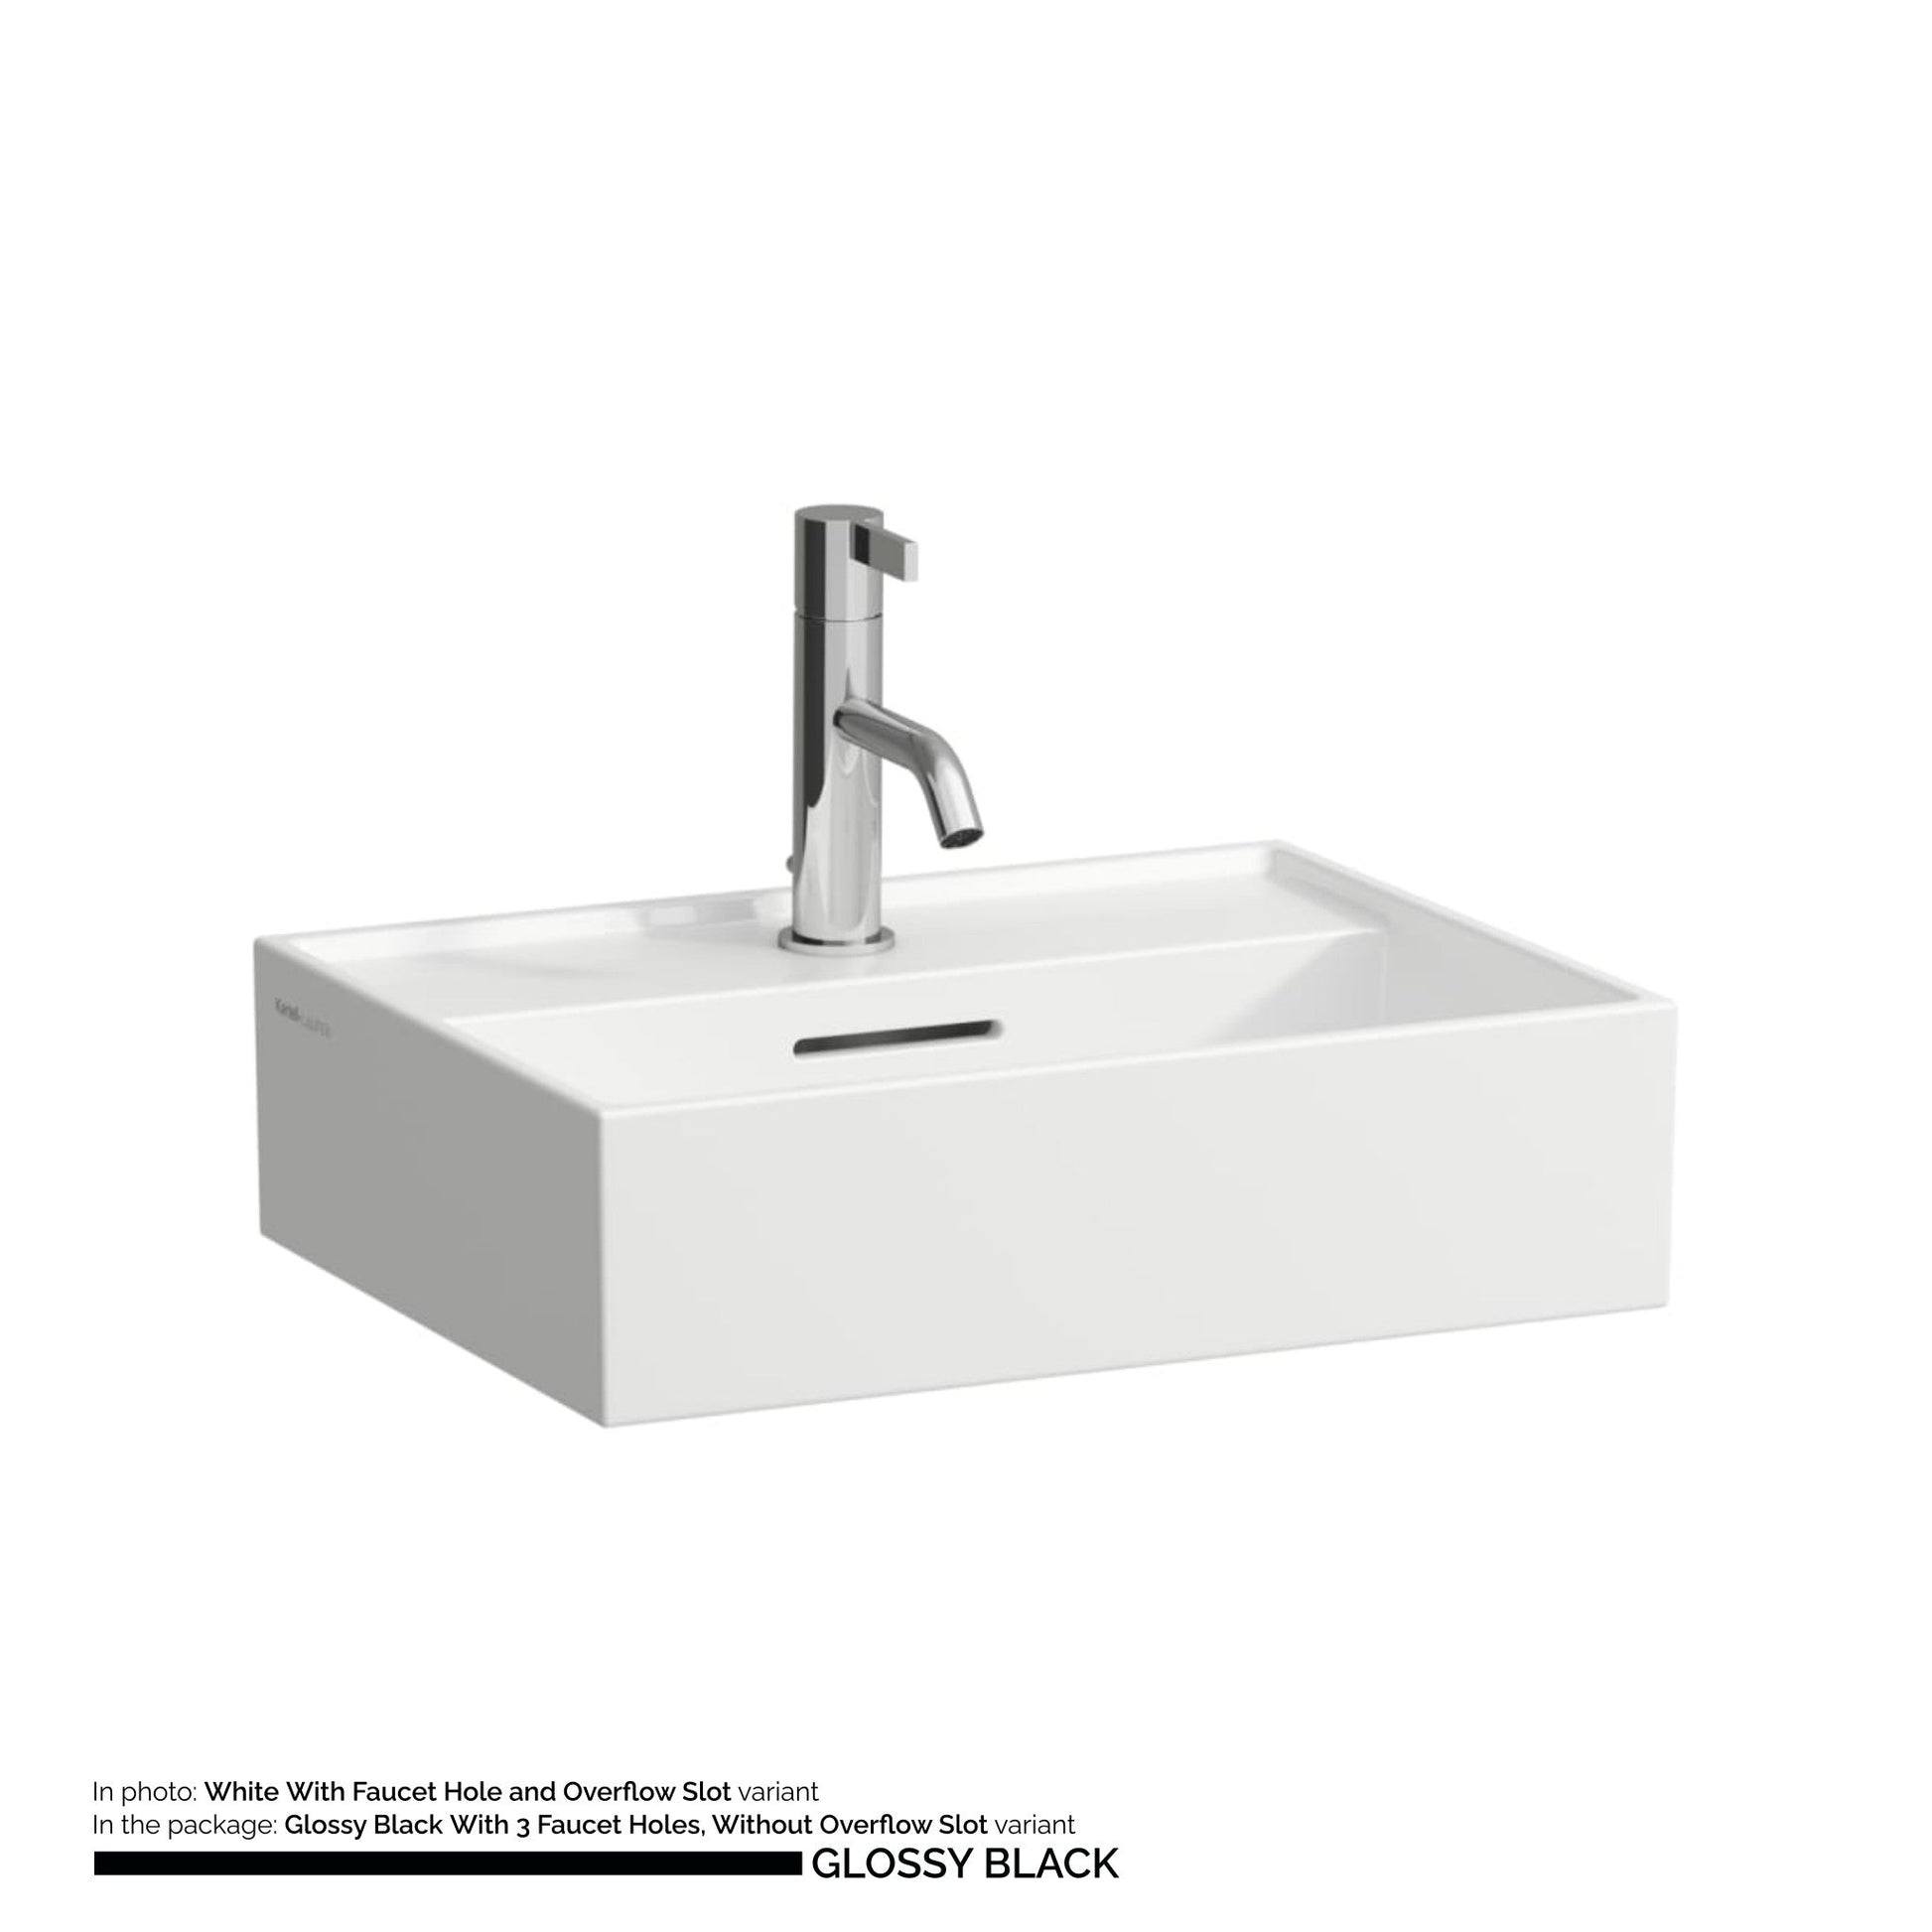 Laufen Kartell 18" x 13" Glossy Black Countertop Bathroom Sink With 3 Faucet Holes